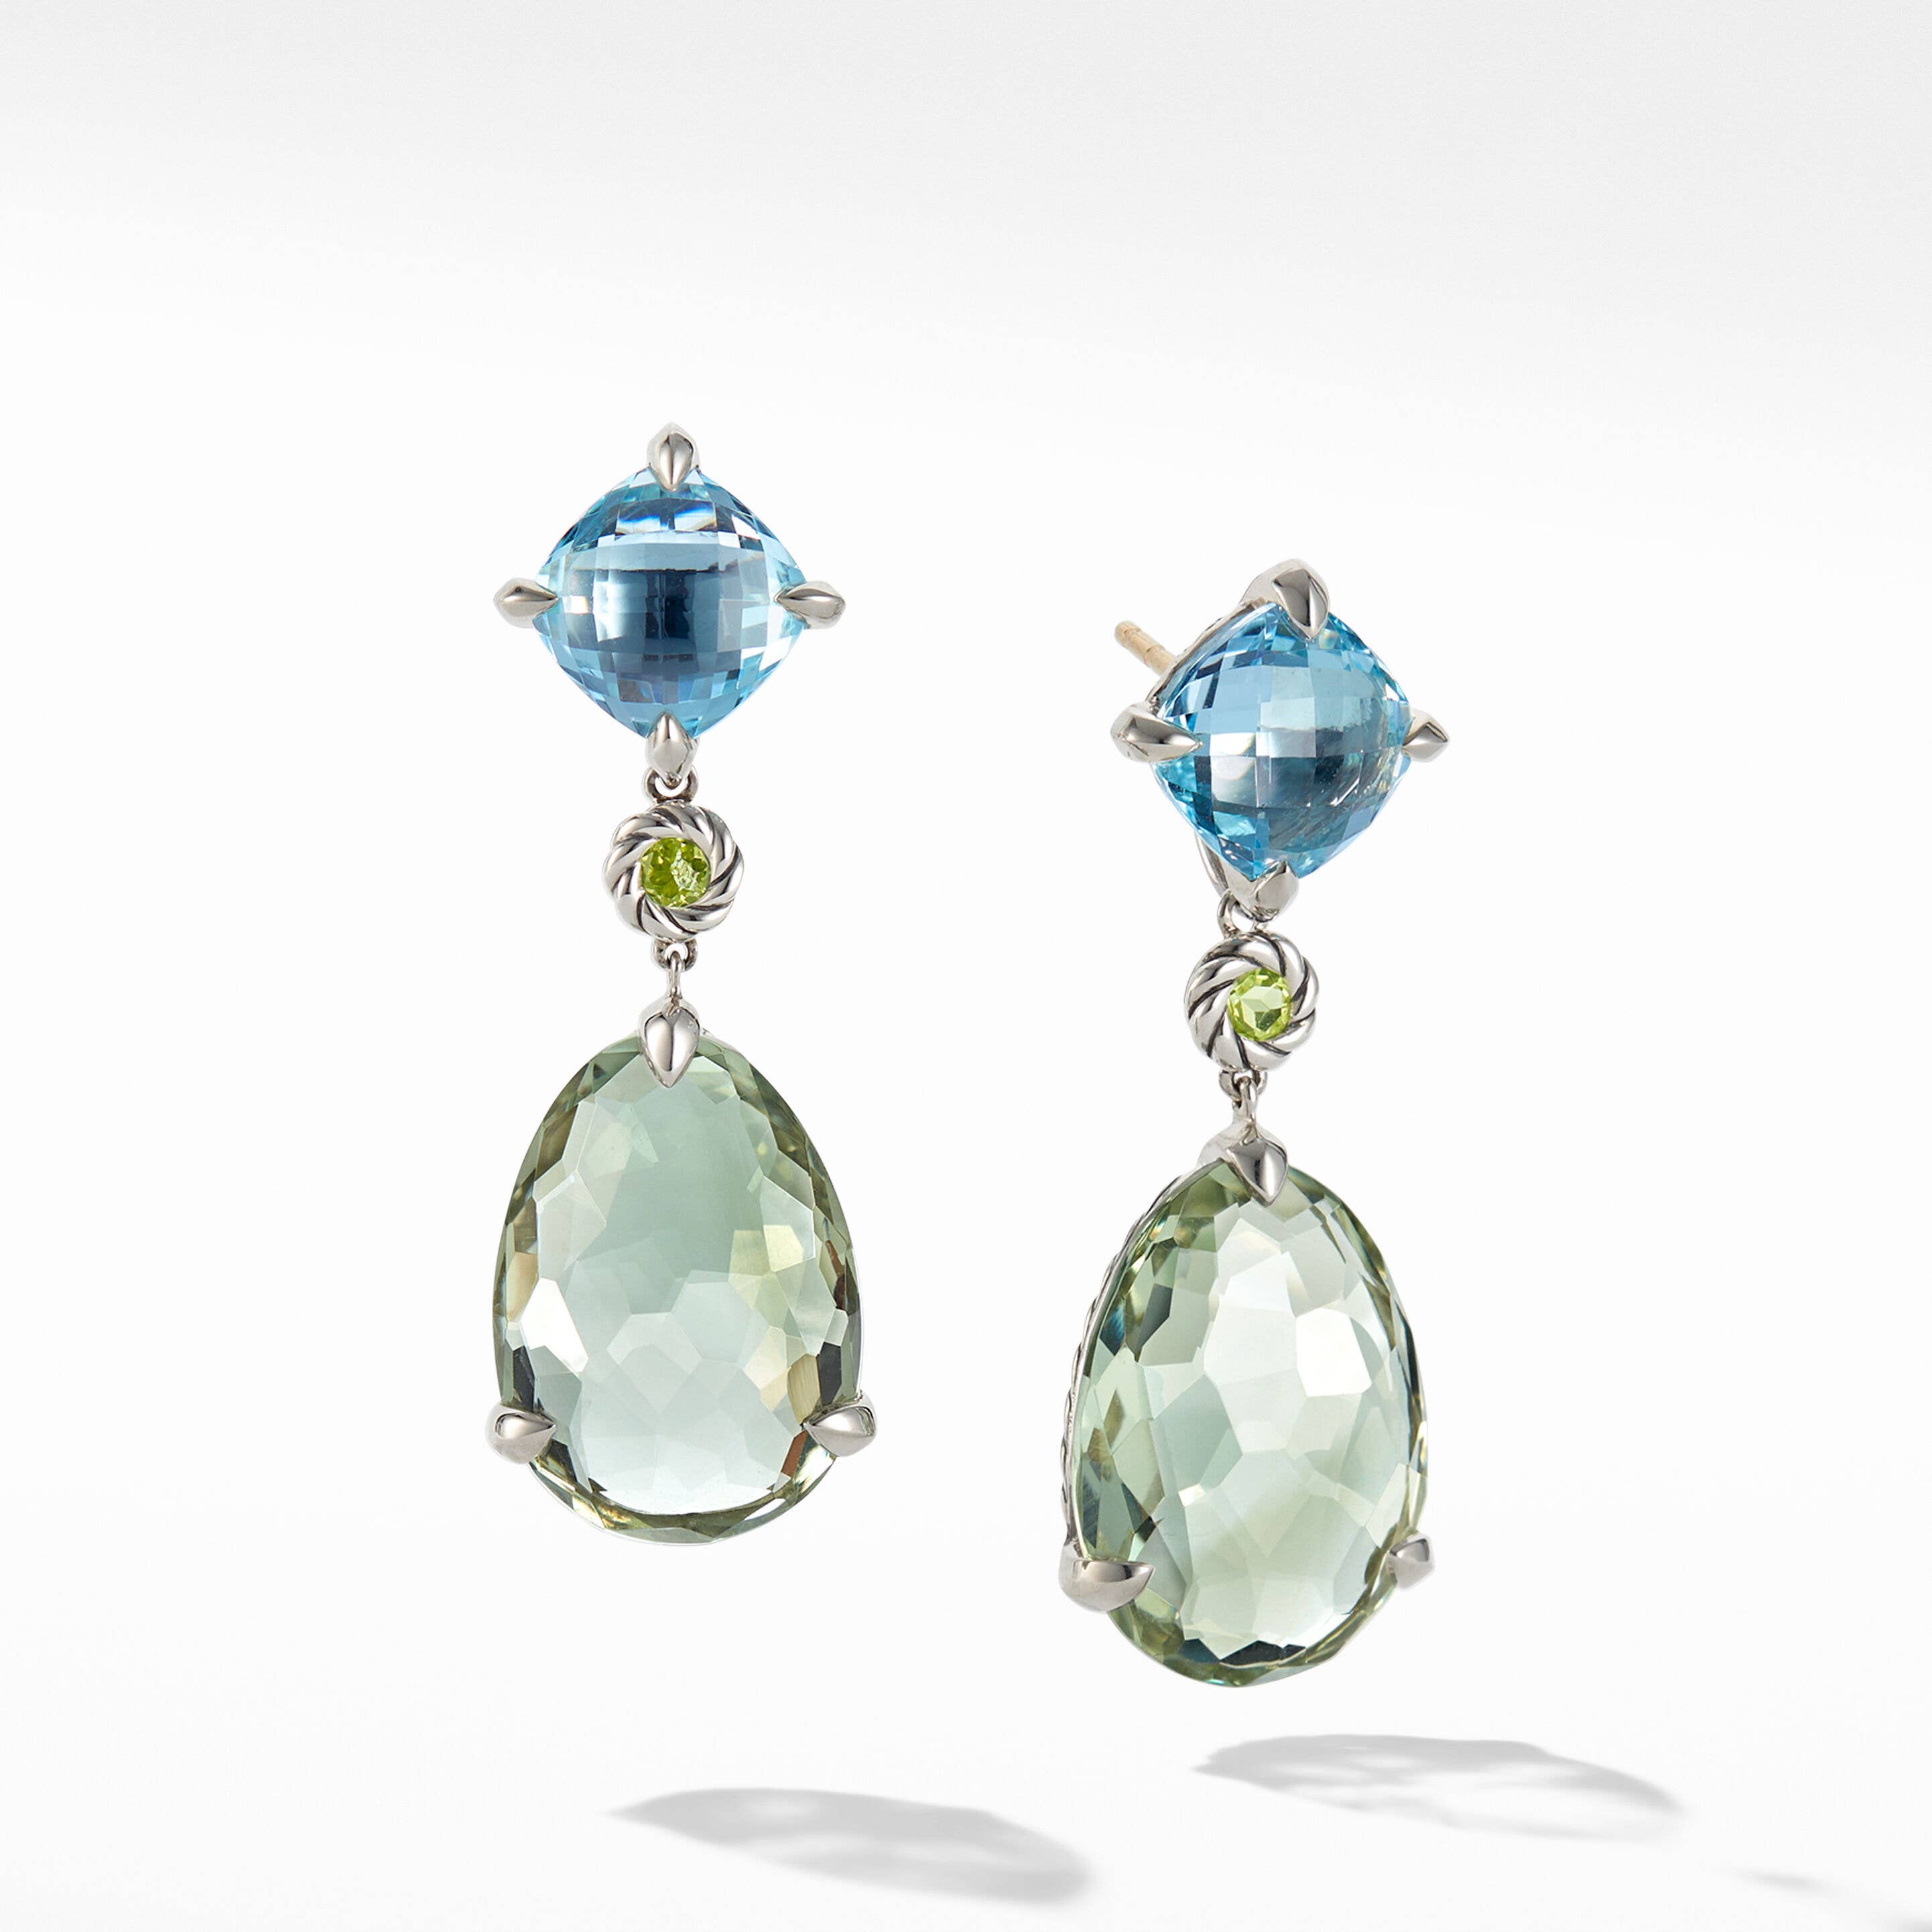 Chatelaine® Drop Earrings in Sterling Silver with Prasiolite, Blue Topaz and Peridot